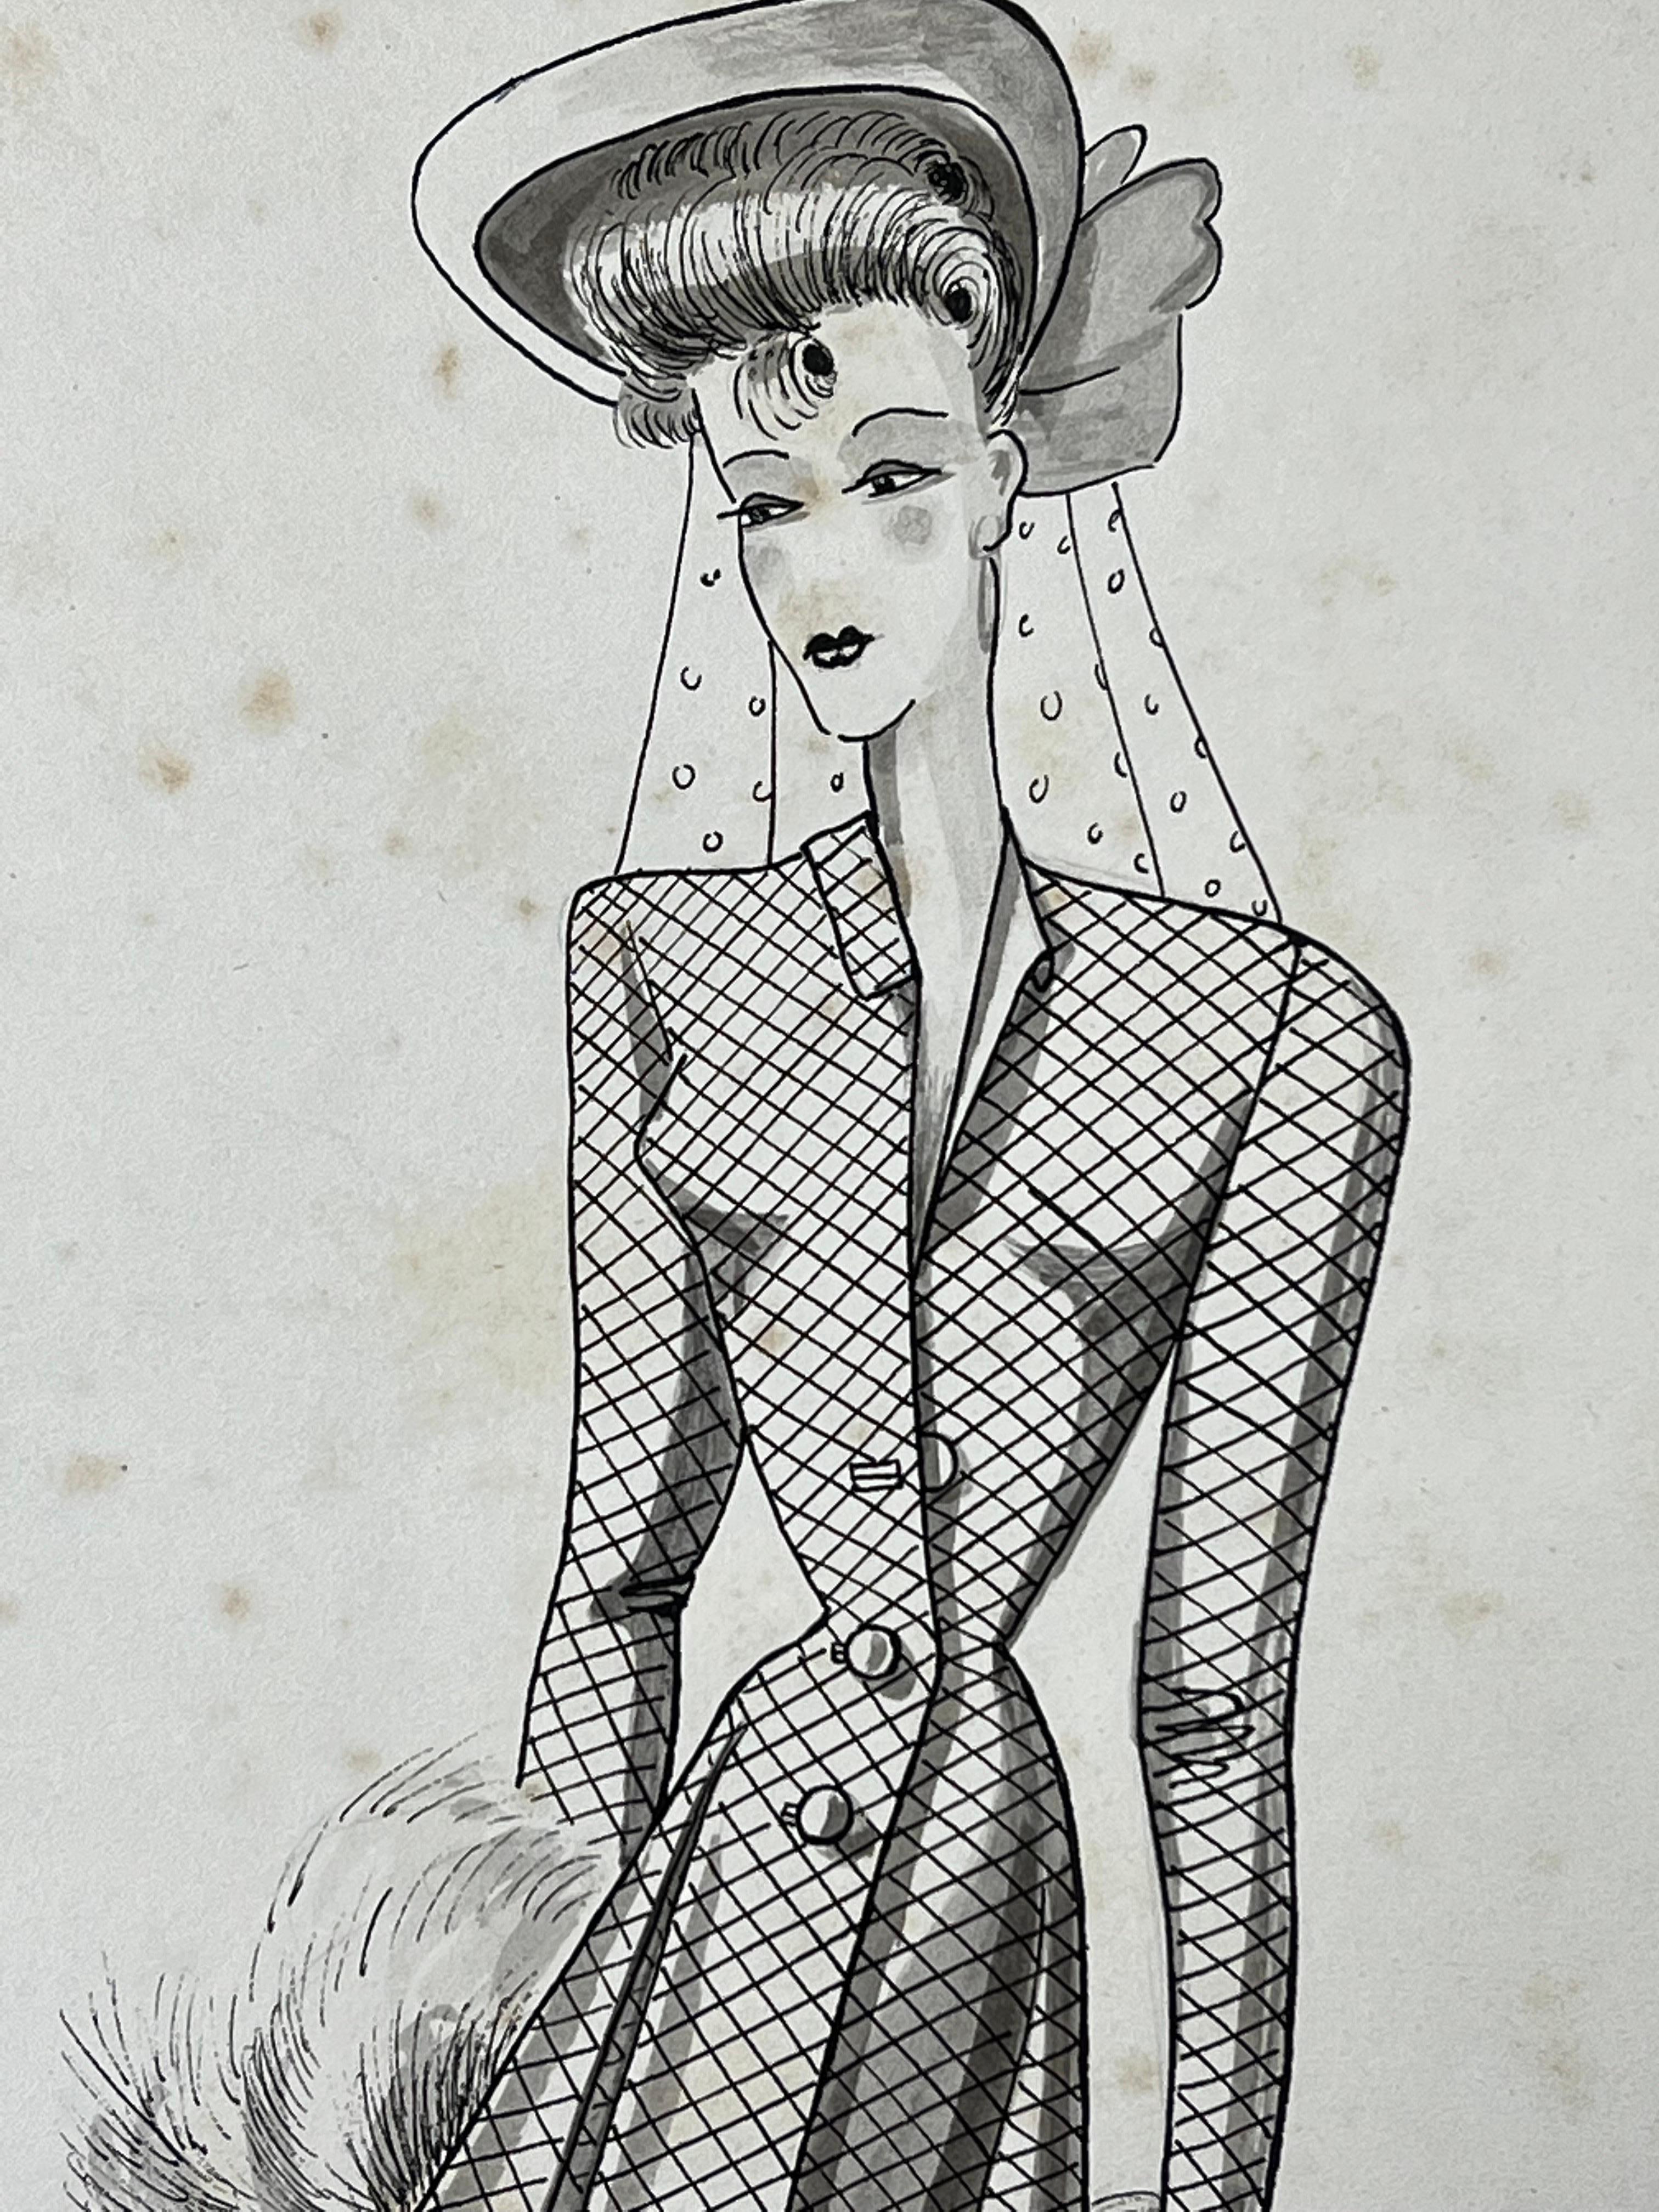 Very stylish, unique and original 1940's fashion design by French illustrator Geneviève Thomas.

The painting, executed in gouache and pencil.

The sketch is original, vintage and measures unframed 10 x 8 inches. It will make wonderful interior